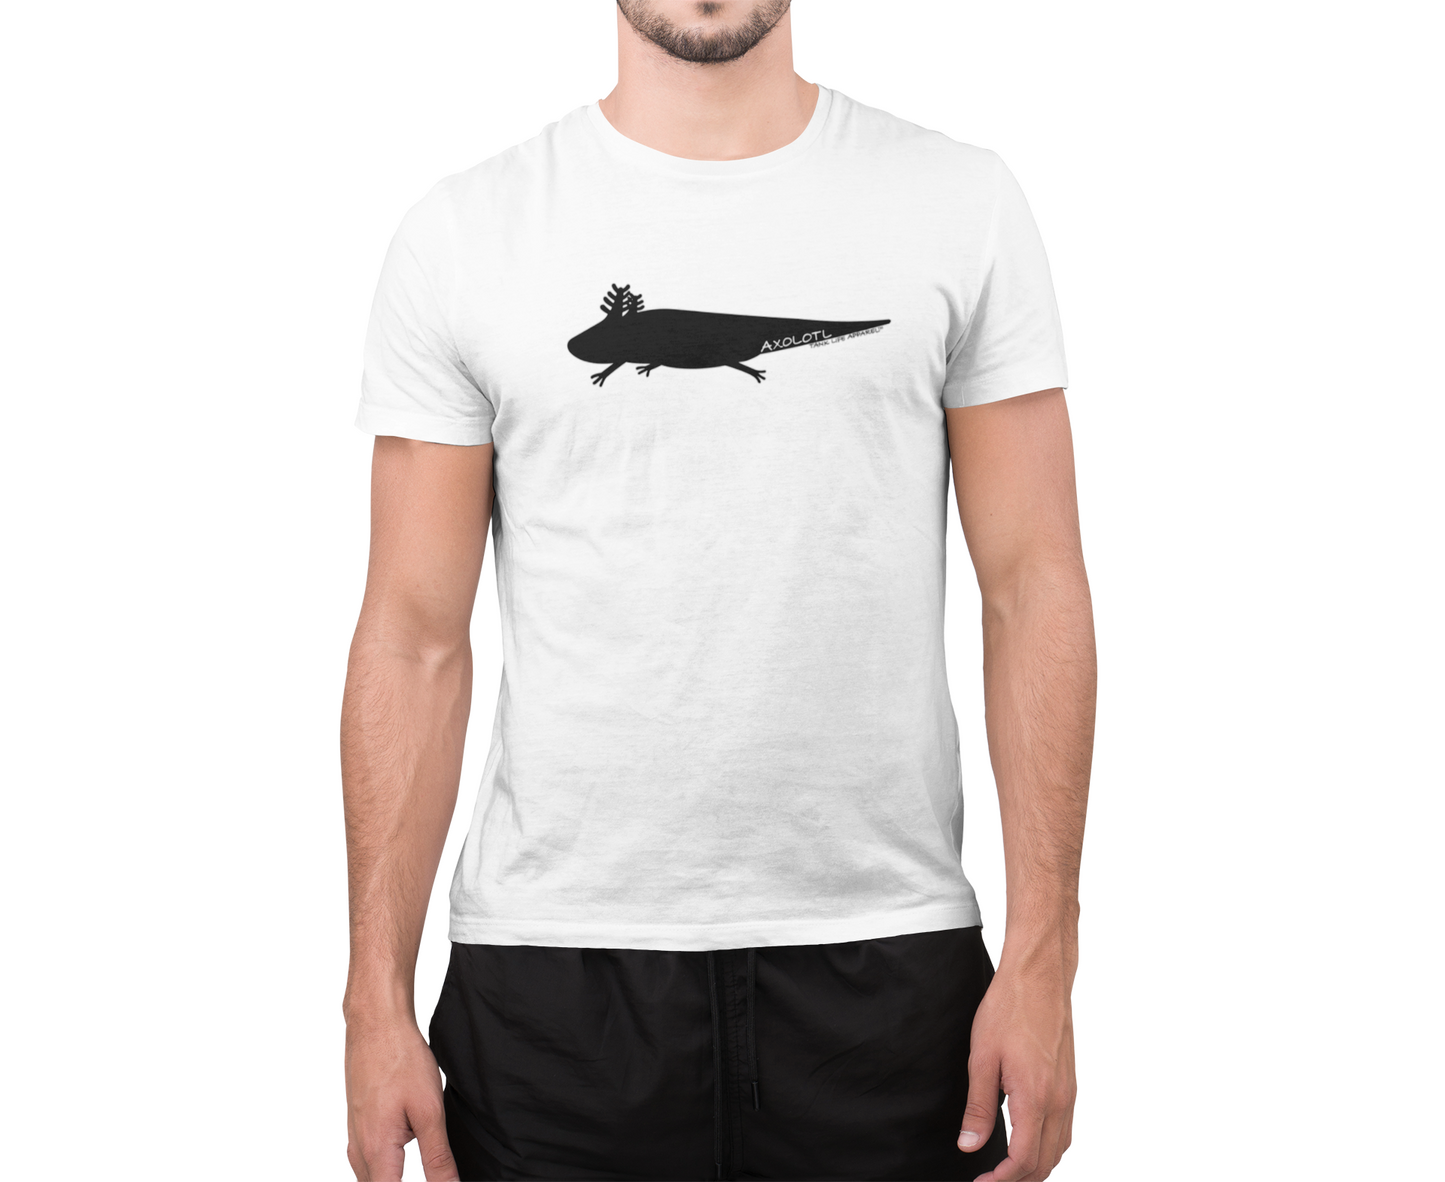 The Tank Life Apparel Axolotl Silhouette design on a classic tee with our custom TLA sleeve label